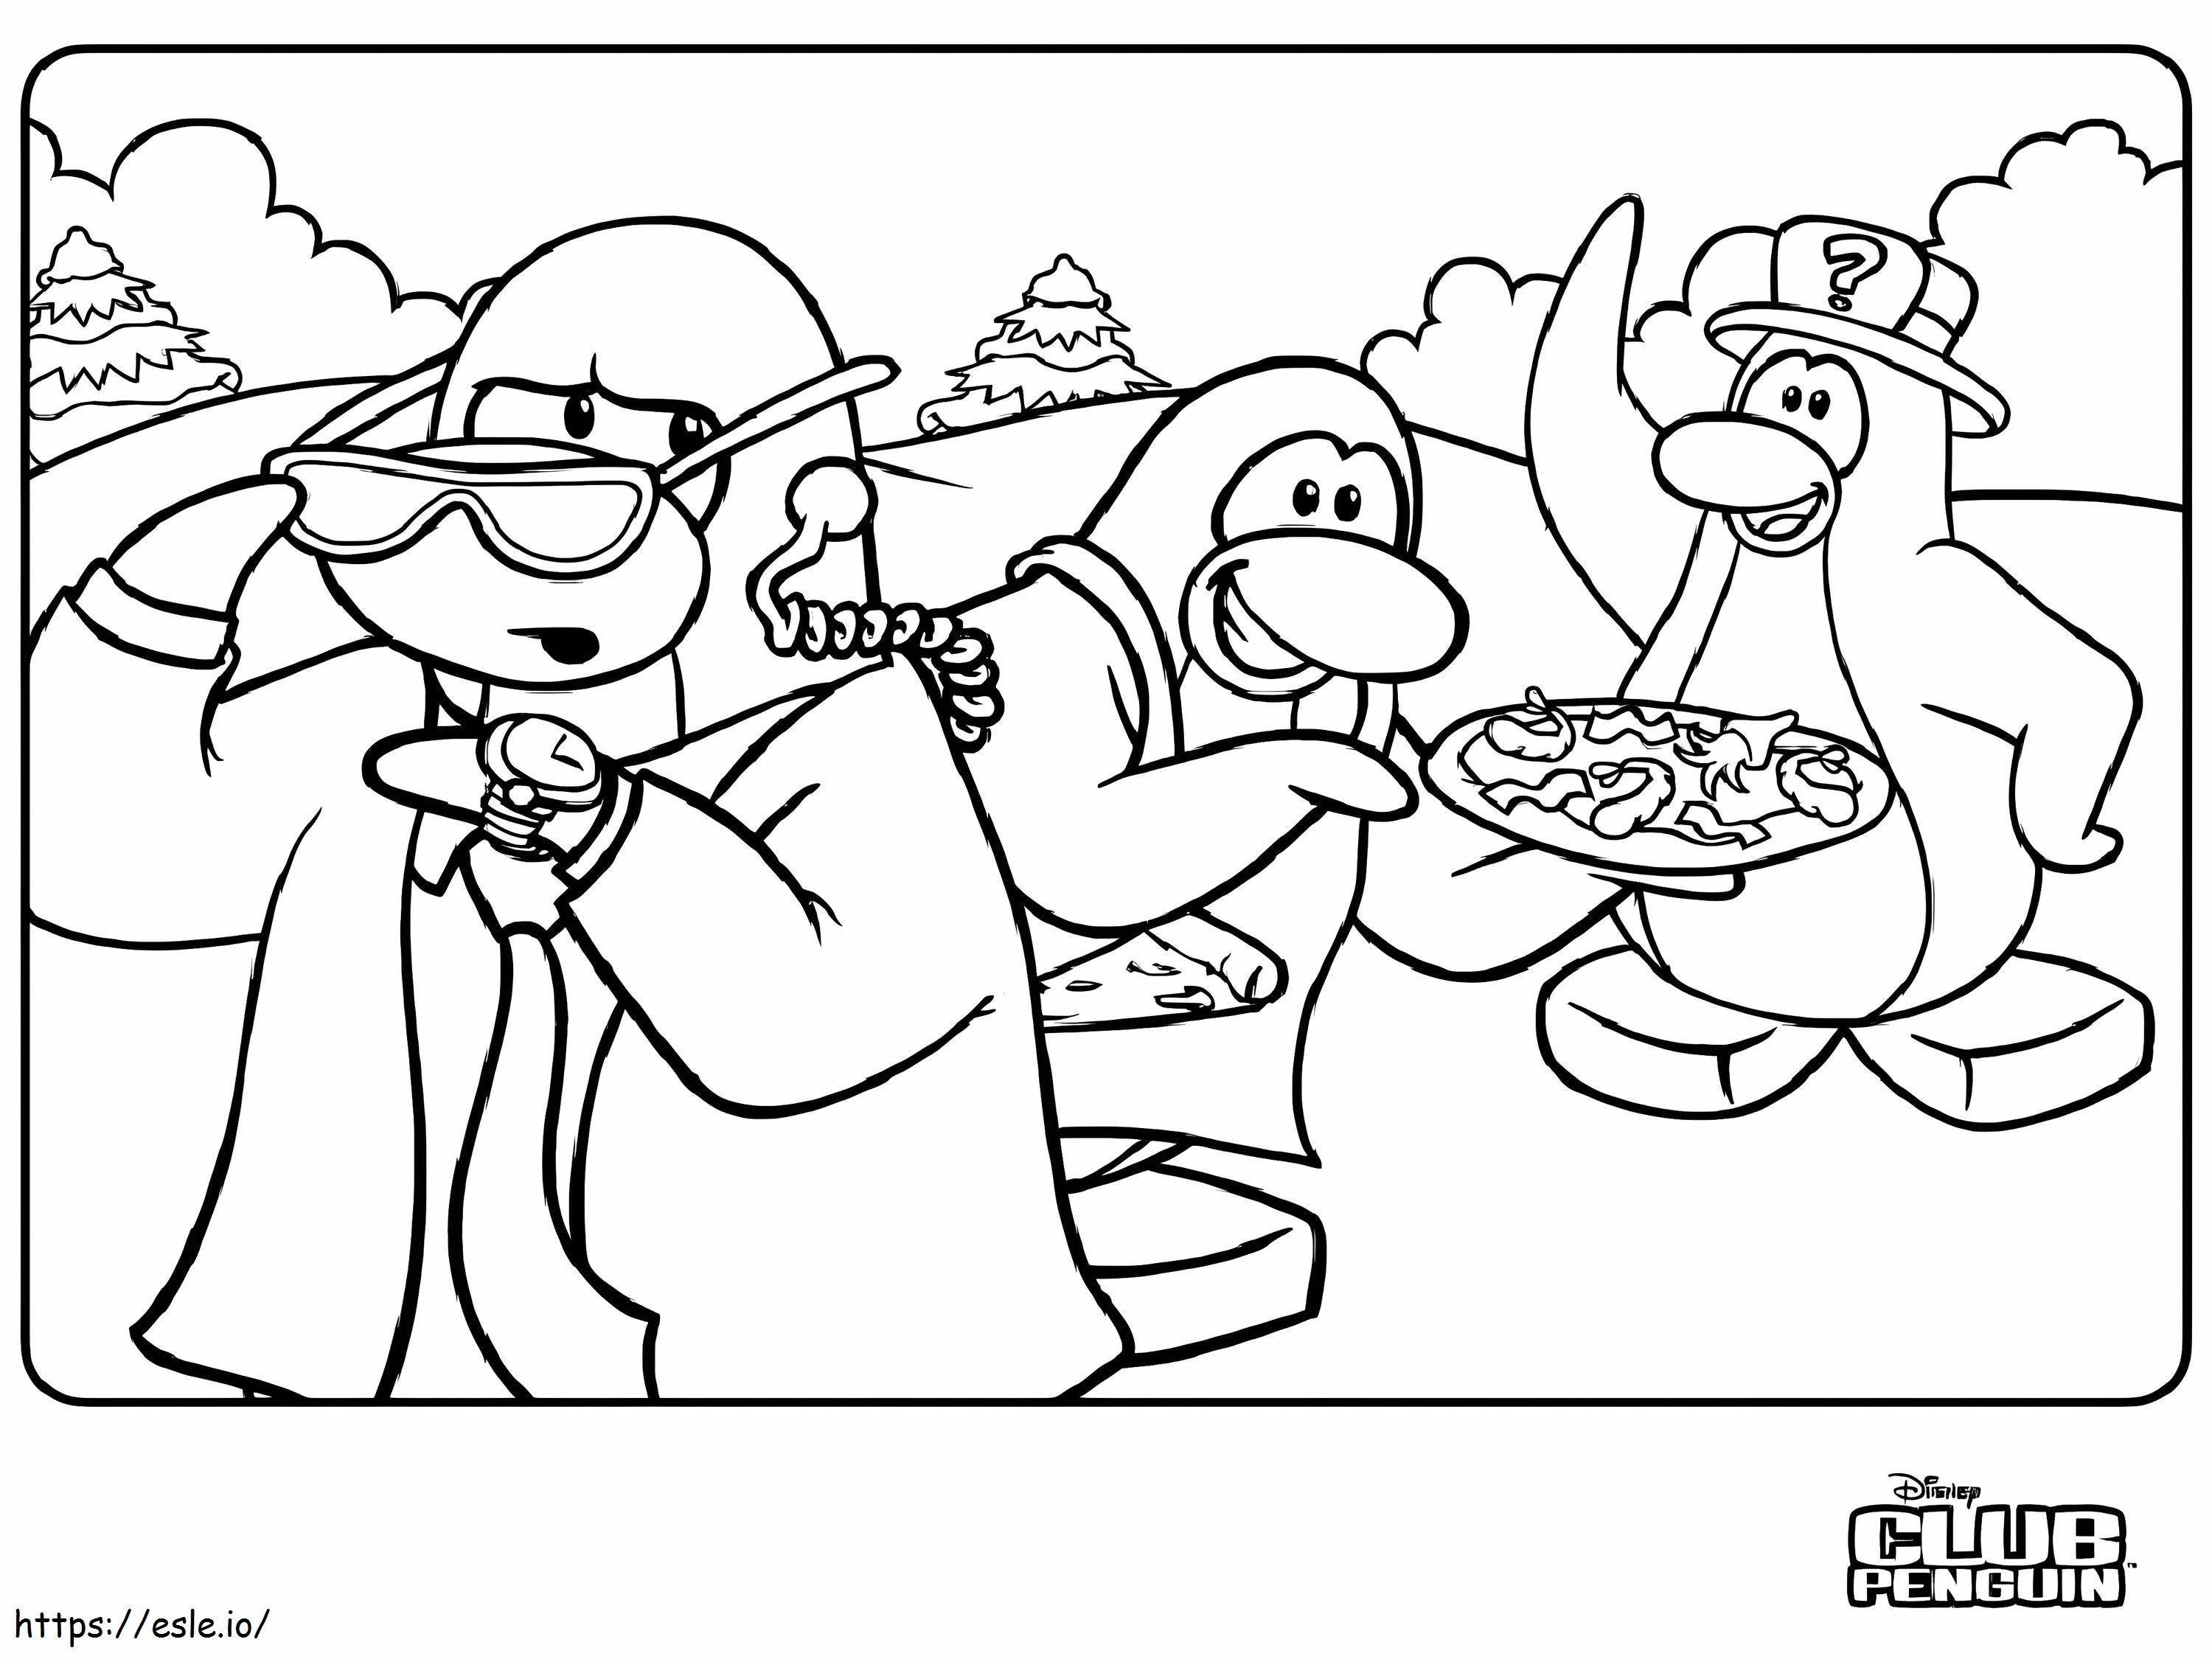 Club Penguin 8 coloring page